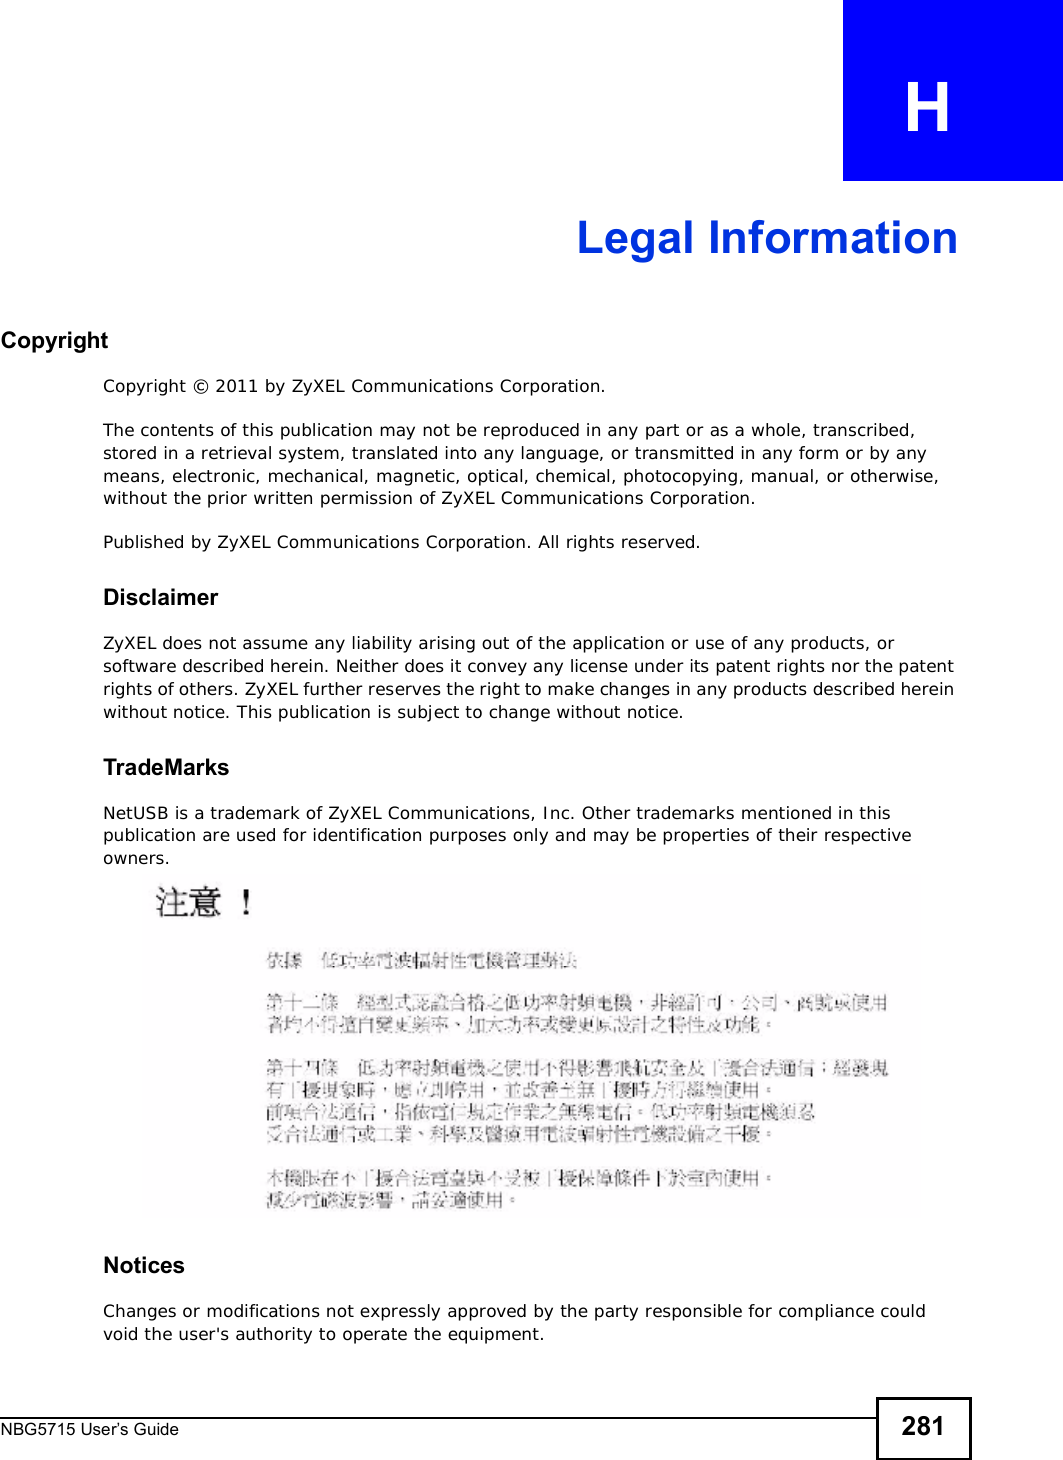 NBG5715 User’s Guide 281APPENDIX   HLegal InformationCopyrightCopyright © 2011 by ZyXEL Communications Corporation.The contents of this publication may not be reproduced in any part or as a whole, transcribed, stored in a retrieval system, translated into any language, or transmitted in any form or by any means, electronic, mechanical, magnetic, optical, chemical, photocopying, manual, or otherwise, without the prior written permission of ZyXEL Communications Corporation.Published by ZyXEL Communications Corporation. All rights reserved.DisclaimerZyXEL does not assume any liability arising out of the application or use of any products, or software described herein. Neither does it convey any license under its patent rights nor the patent rights of others. ZyXEL further reserves the right to make changes in any products described herein without notice. This publication is subject to change without notice.TradeMarksNetUSB is a trademark of ZyXEL Communications, Inc. Other trademarks mentioned in this publication are used for identification purposes only and may be properties of their respective owners.NoticesChanges or modifications not expressly approved by the party responsible for compliance could void the user&apos;s authority to operate the equipment.